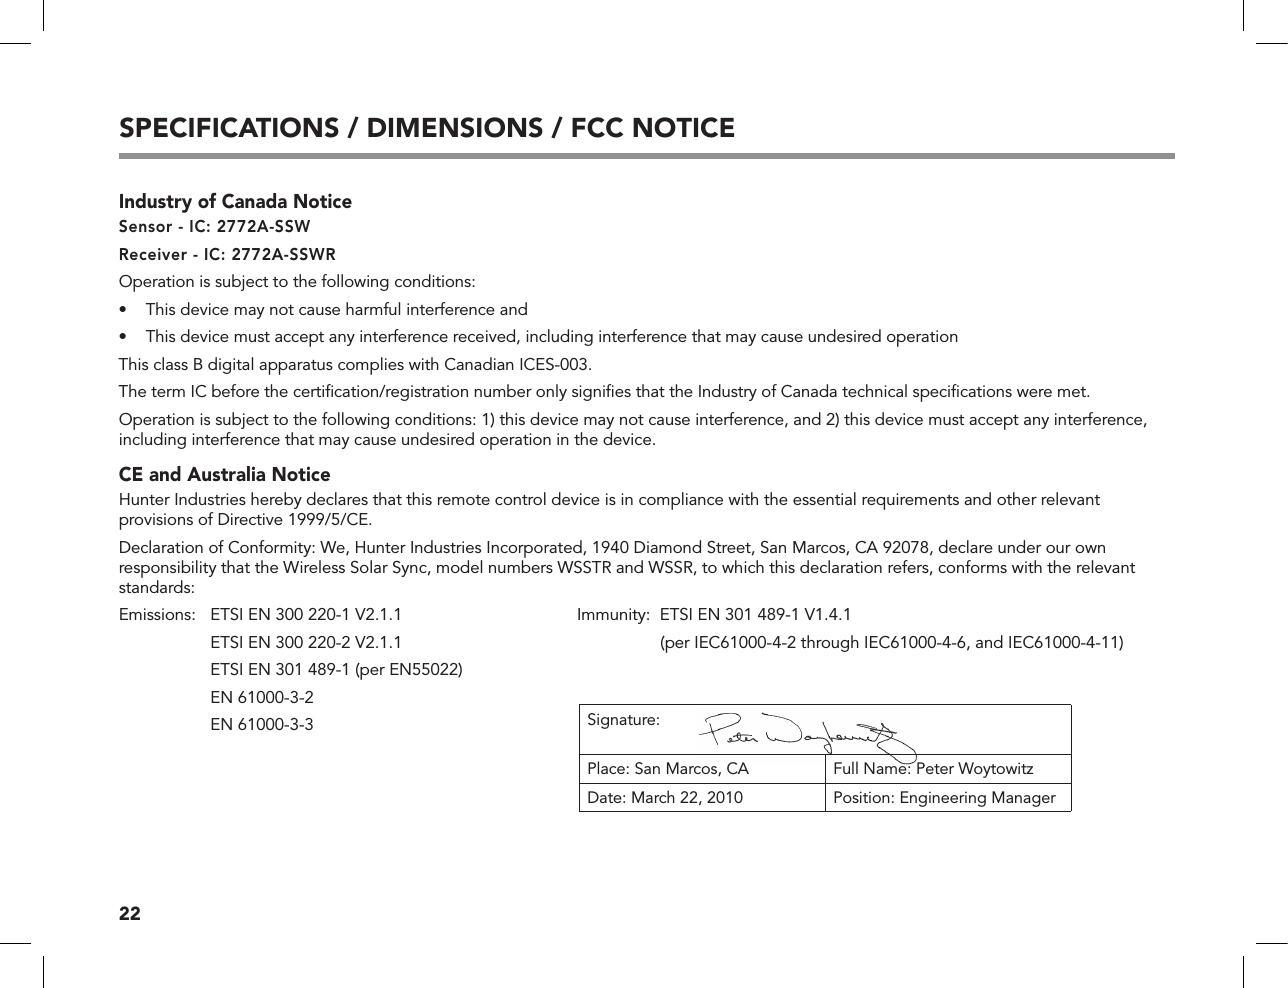 22SPECIFICATIONS / DIMENSIONS / FCC NOTICEIndustry of Canada NoticeSensor - IC: 2772A-SSWReceiver - IC: 2772A-SSWROperation is subject to the following conditions:•  This device may not cause harmful interference and•  This device must accept any interference received, including interference that may cause undesired operationThis class B digital apparatus complies with Canadian ICES-003.The term IC before the certiﬁcation/registration number only signiﬁes that the Industry of Canada technical speciﬁcations were met. Operation is subject to the following conditions: 1) this device may not cause interference, and 2) this device must accept any interference, including interference that may cause undesired operation in the device. CE and Australia NoticeHunter Industries hereby declares that this remote control device is in compliance with the essential requirements and other relevant provisions of Directive 1999/5/CE.Declaration of Conformity: We, Hunter Industries Incorporated, 1940 Diamond Street, San Marcos, CA 92078, declare under our own responsibility that the Wireless Solar Sync, model numbers WSSTR and WSSR, to which this declaration refers, conforms with the relevant standards:Emissions:      ETSI EN 300 220-1 V2.1.1  Immunity:  ETSI EN 301 489-1 V1.4.1     ETSI EN 300 220-2 V2.1.1    (per IEC61000-4-2 through IEC61000-4-6, and IEC61000-4-11)  ETSI EN 301 489-1 (per EN55022)  EN 61000-3-2  EN 61000-3-3 Signature:Place: San Marcos, CA Full Name: Peter WoytowitzDate: March 22, 2010 Position: Engineering Manager